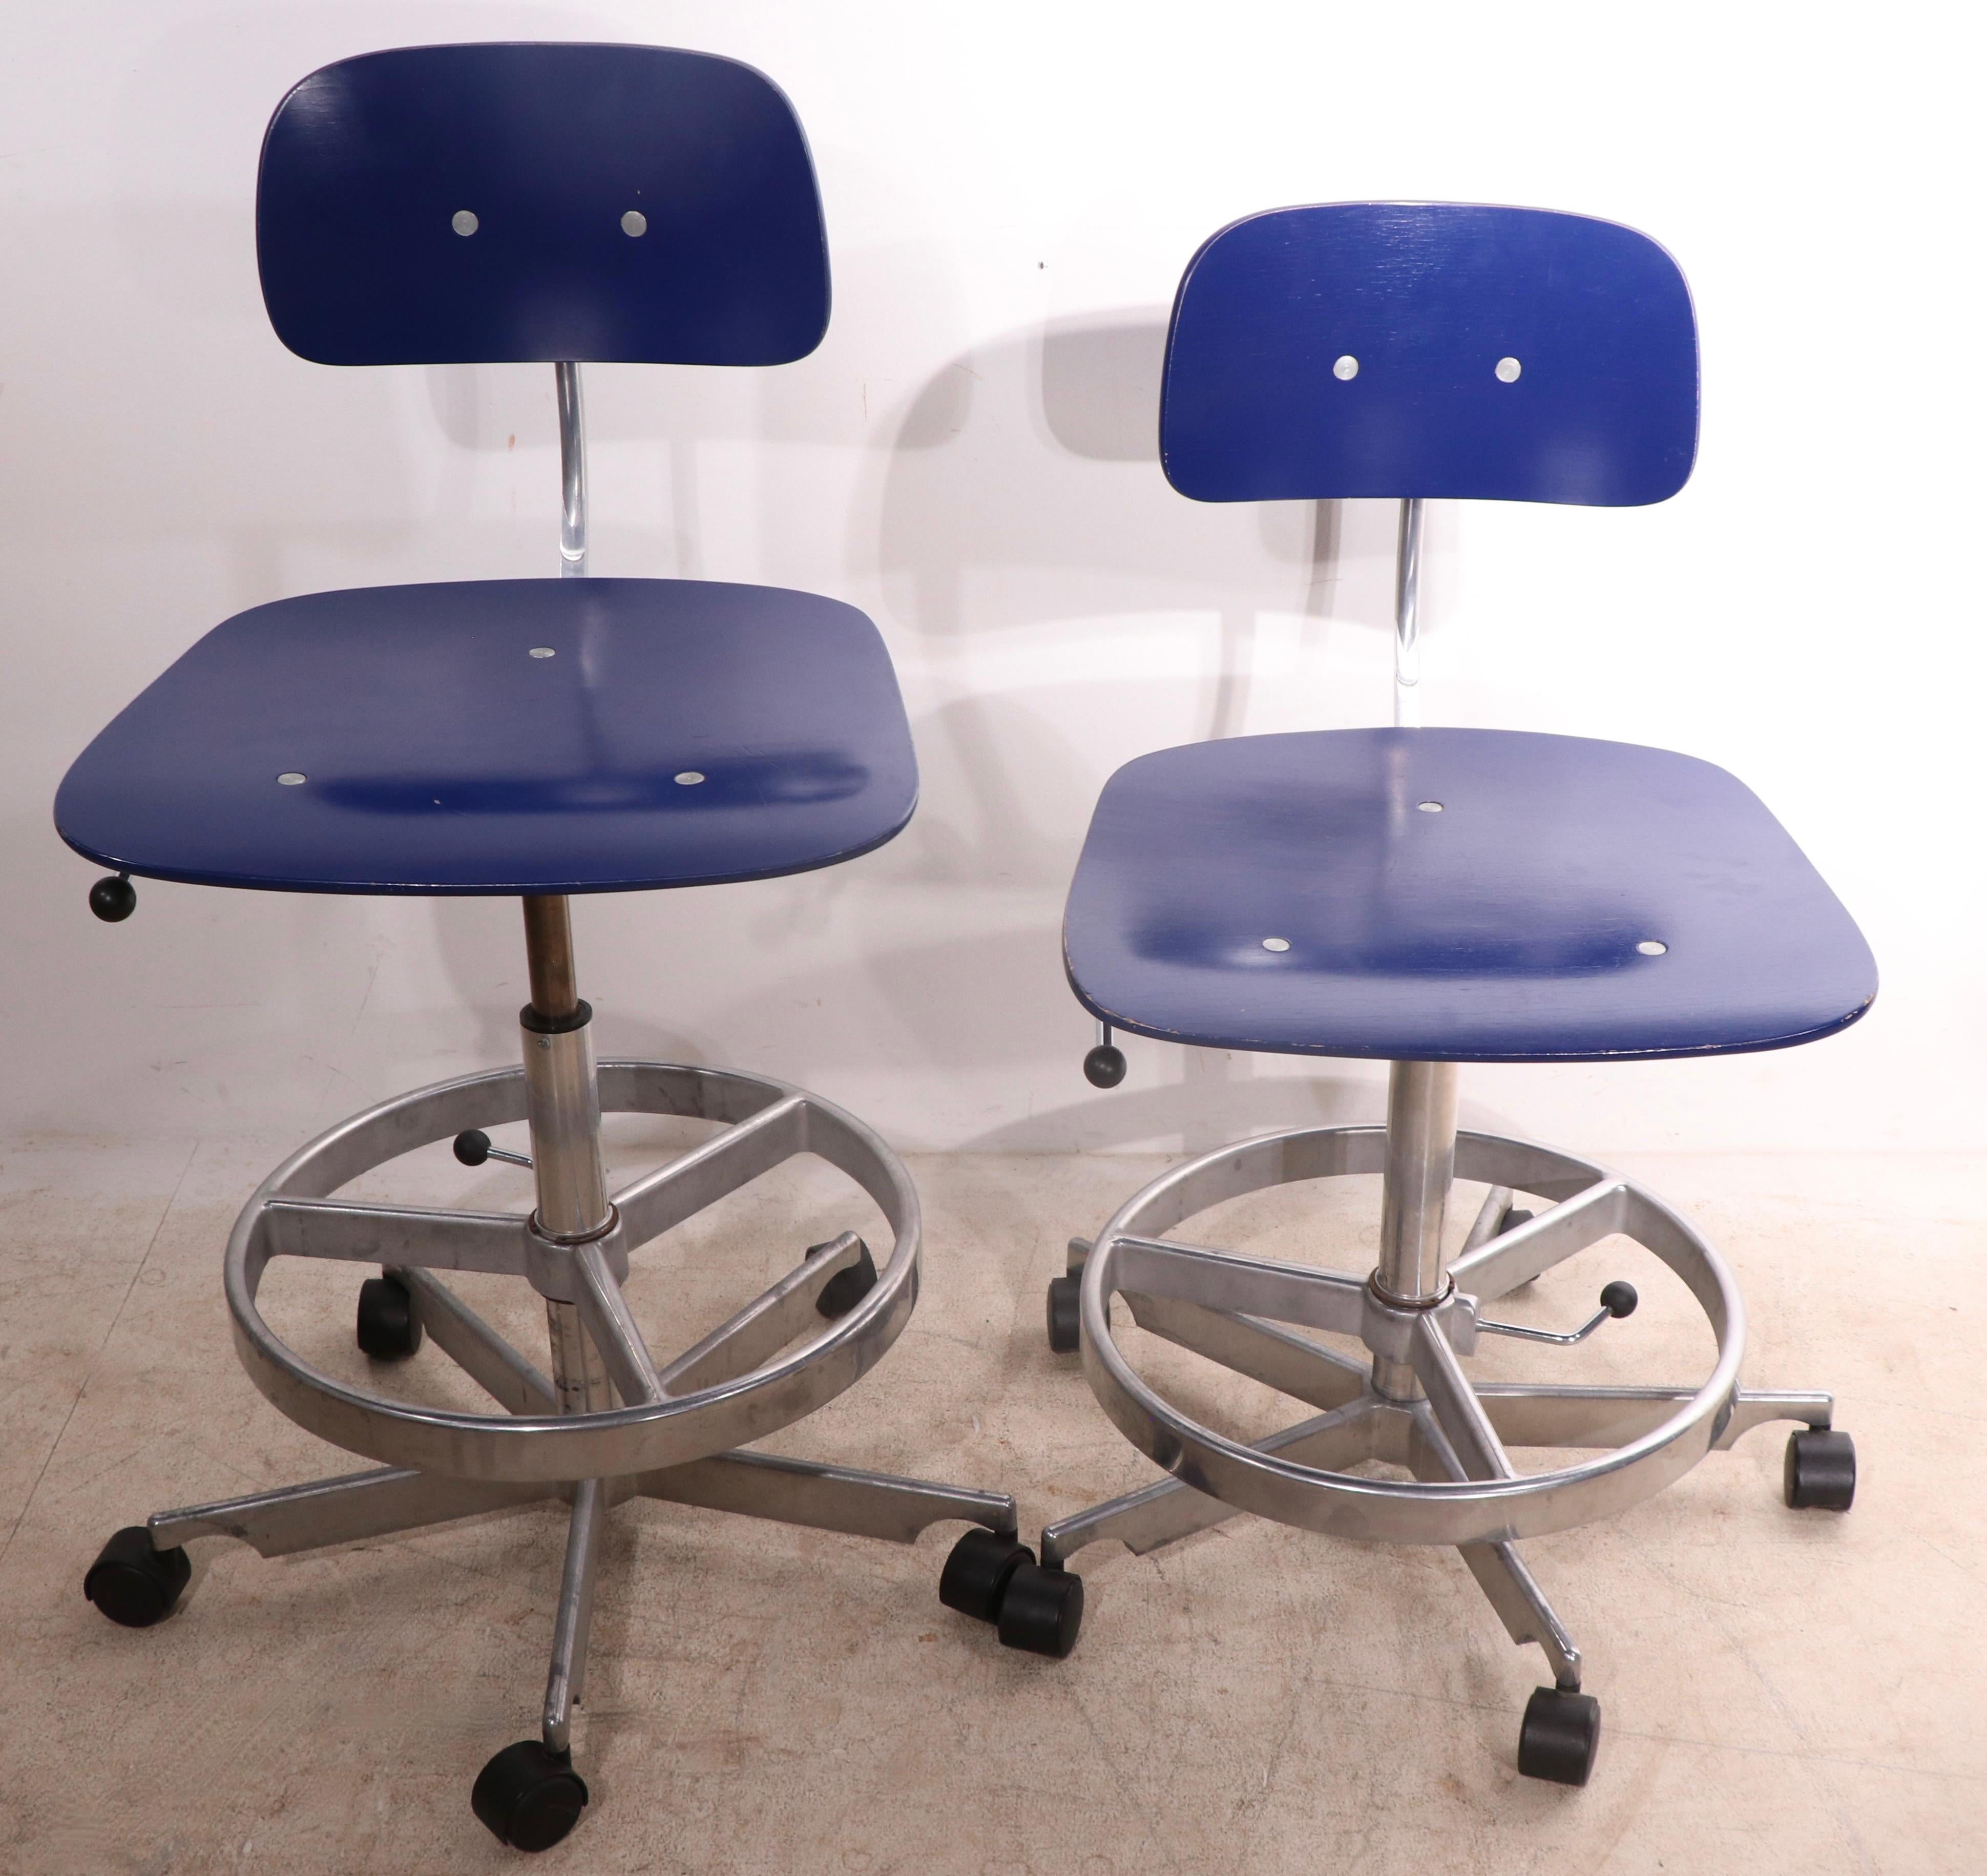 Sophisticated, architectural,  set of four adjustable swivel stools by Jorgen Rasmussen for Fritz Hansen.  Constructed of blue finish  bent plywood, on chrome and aluminum bases, with black plastic wheel coaster feet. In addition to the swivel